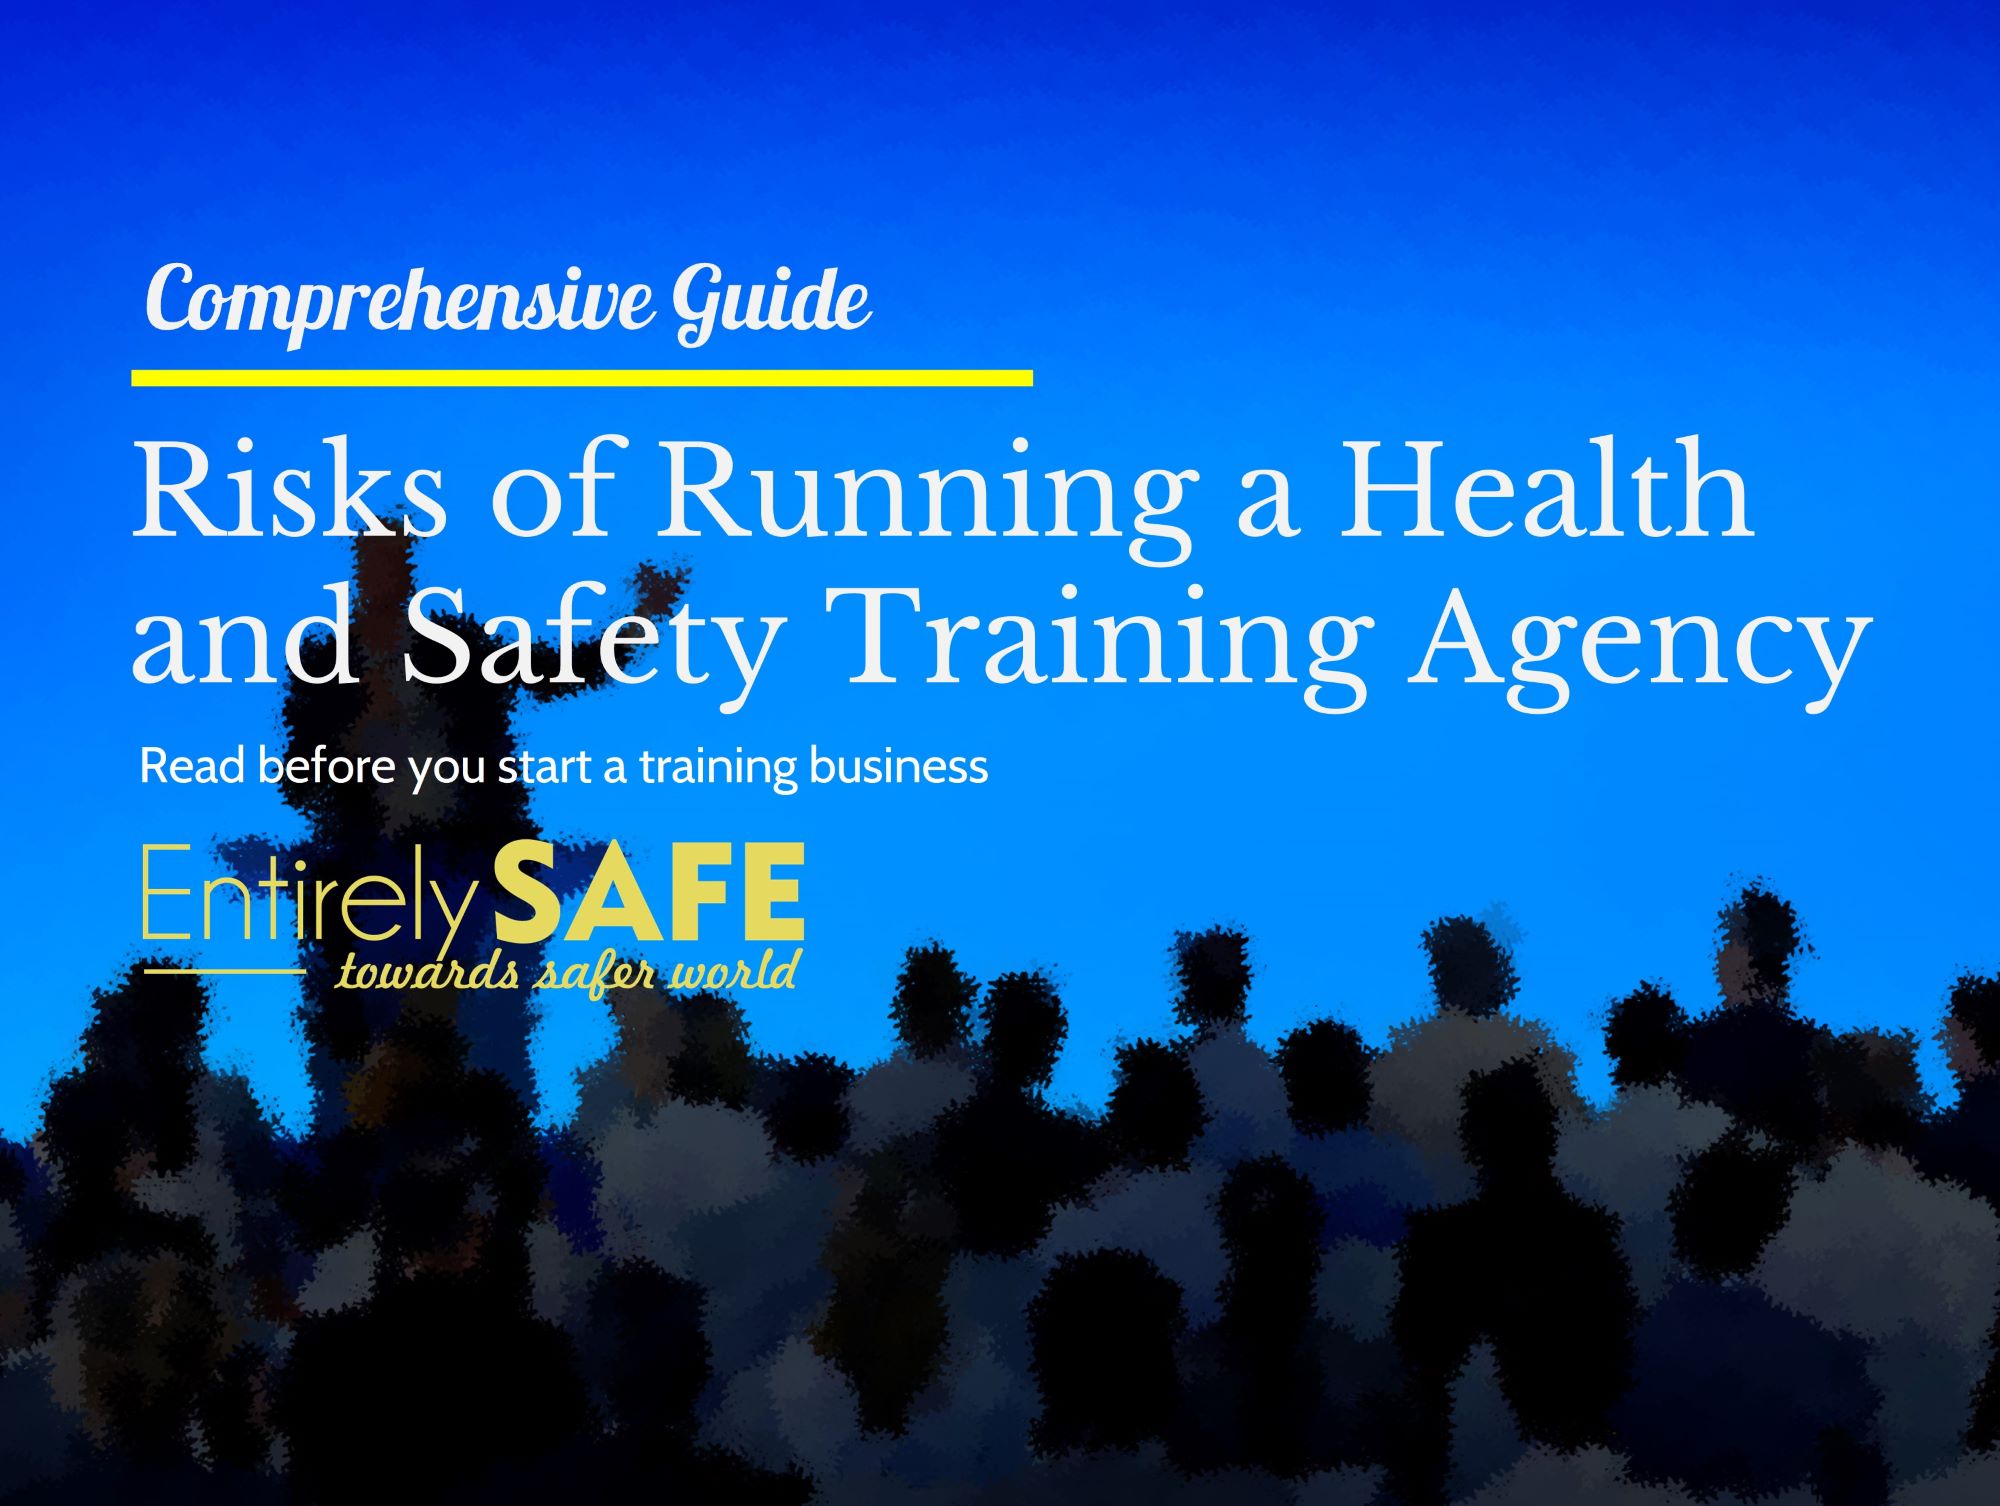 Navigating the Risks of Running a Health and Safety Training Agency